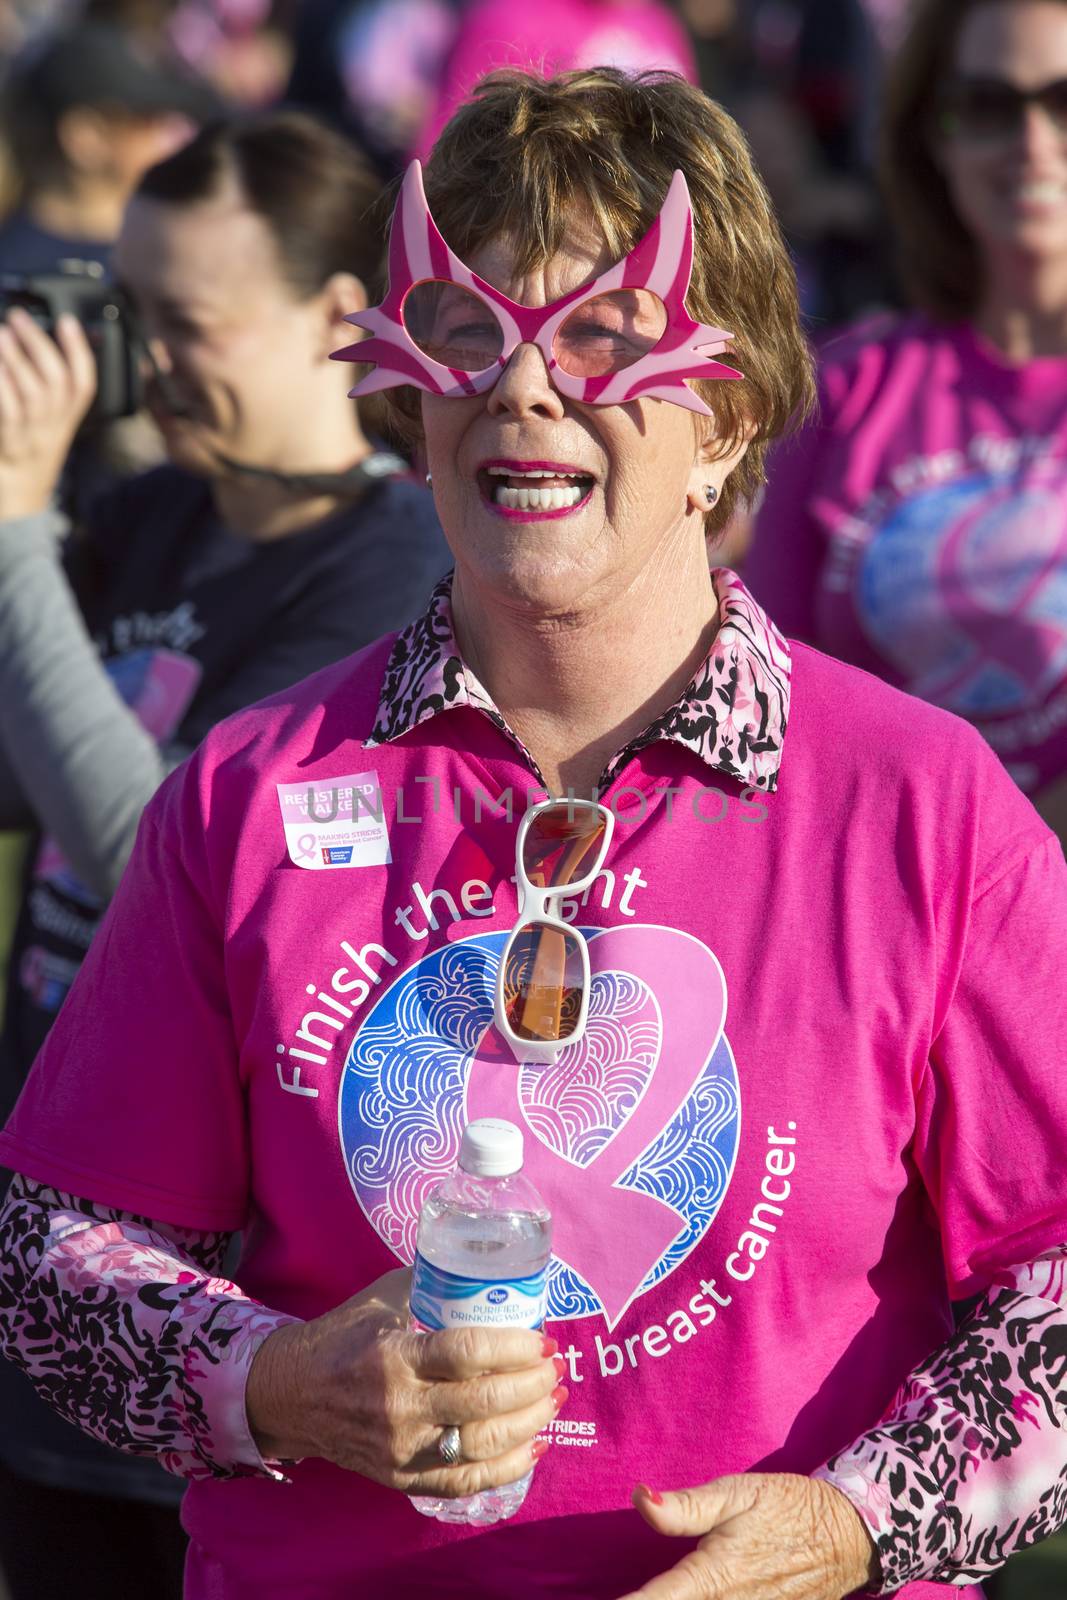 Woman in Outlandish Glasses at Breast Cancer Event by Creatista